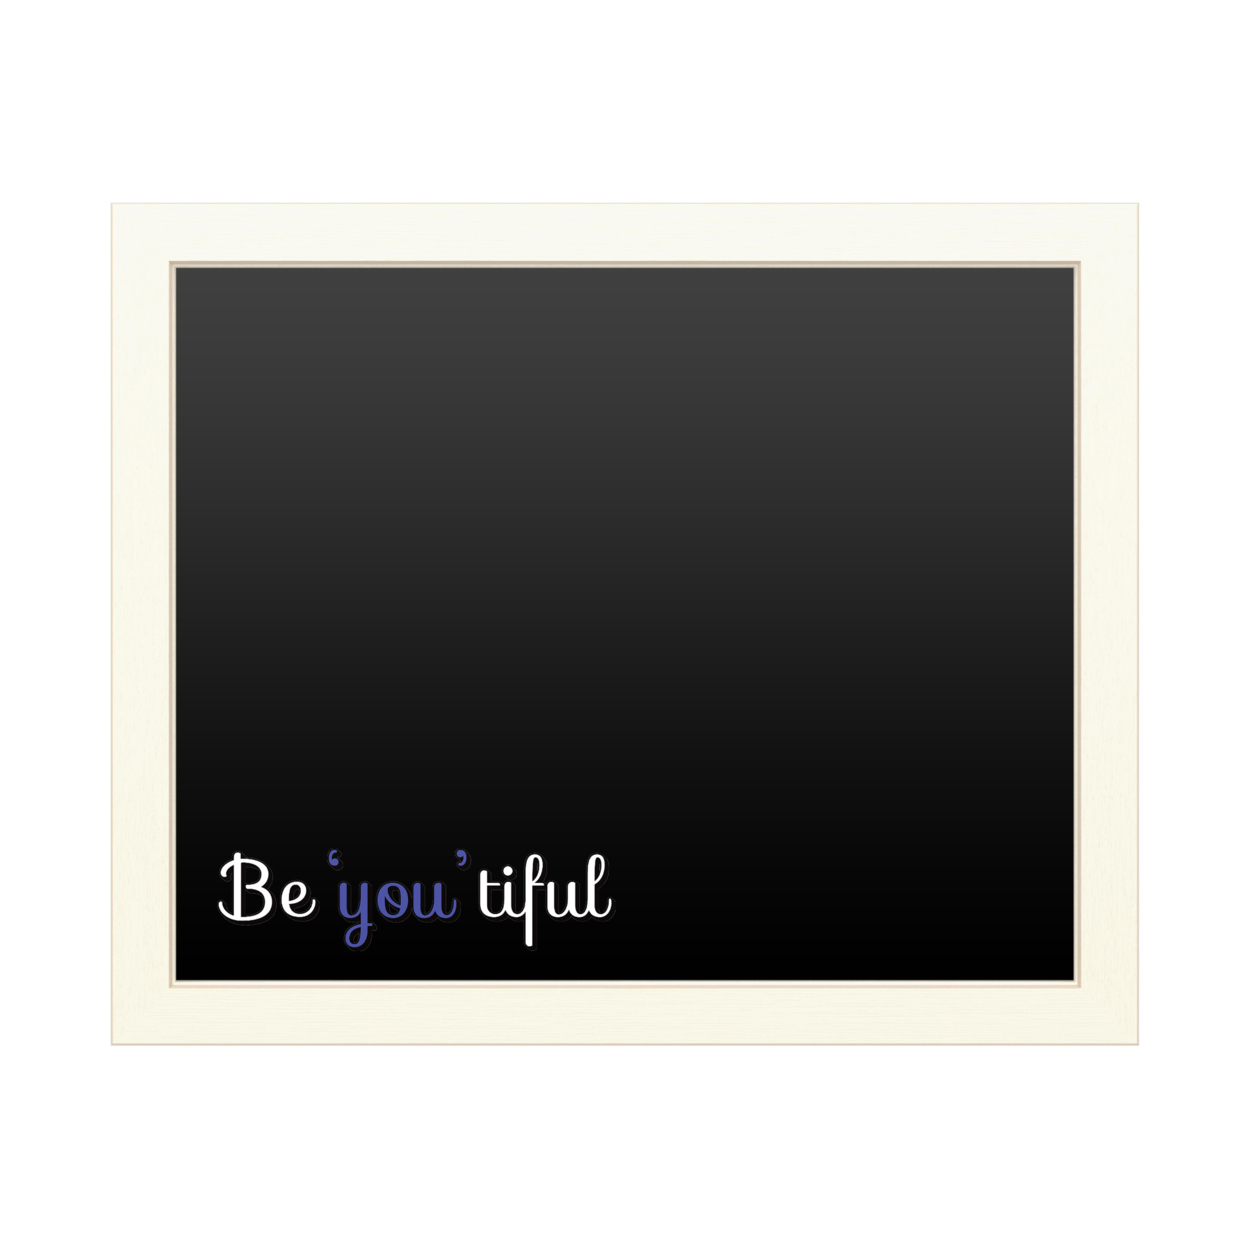 16 X 20 Chalk Board With Printed Artwork - Be You Tiful White Board - Ready To Hang Chalkboard